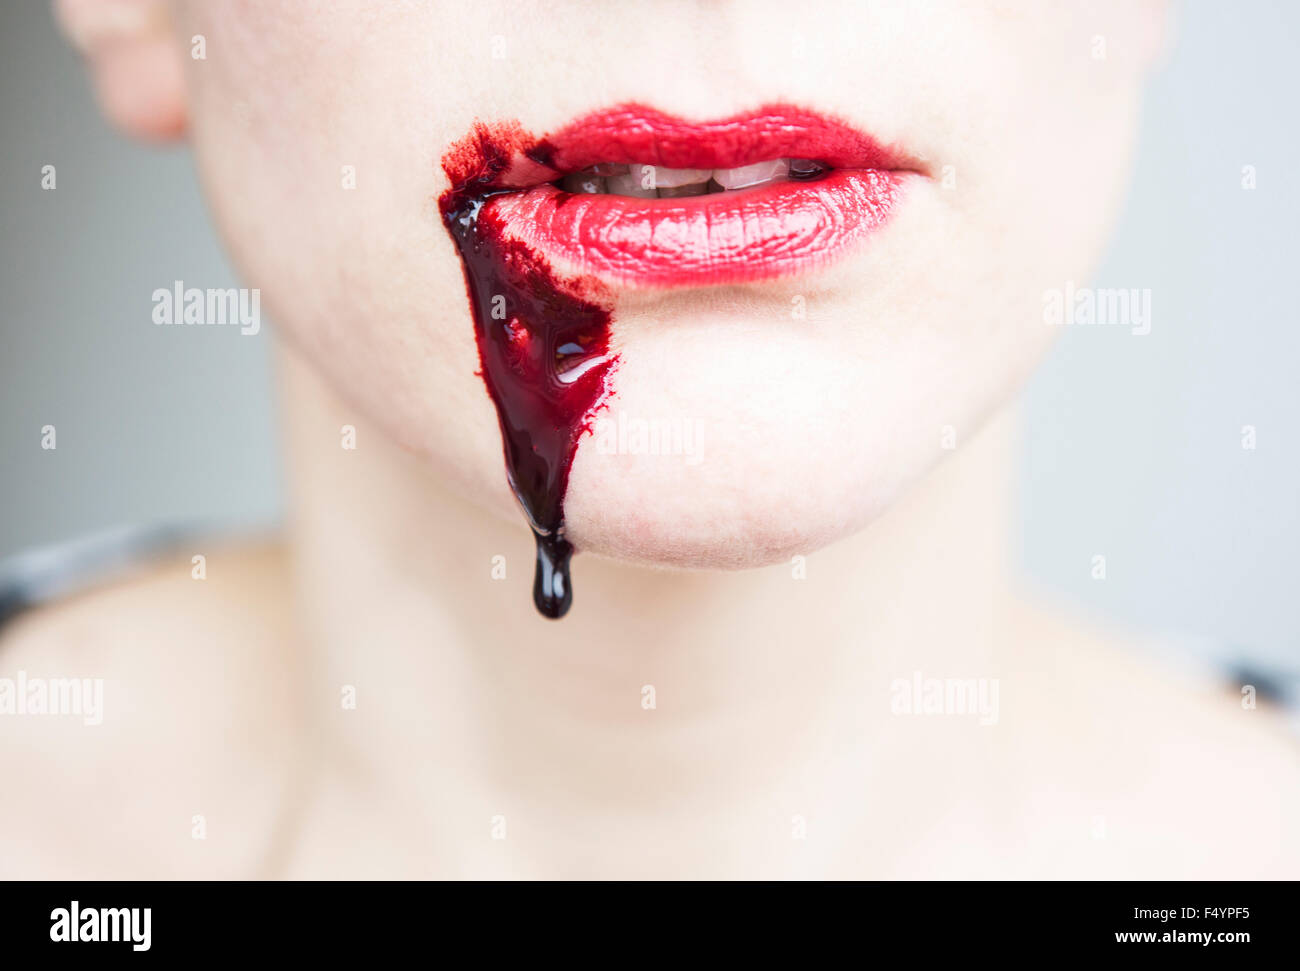 closeup of bloody mouth of woman Stock Photo